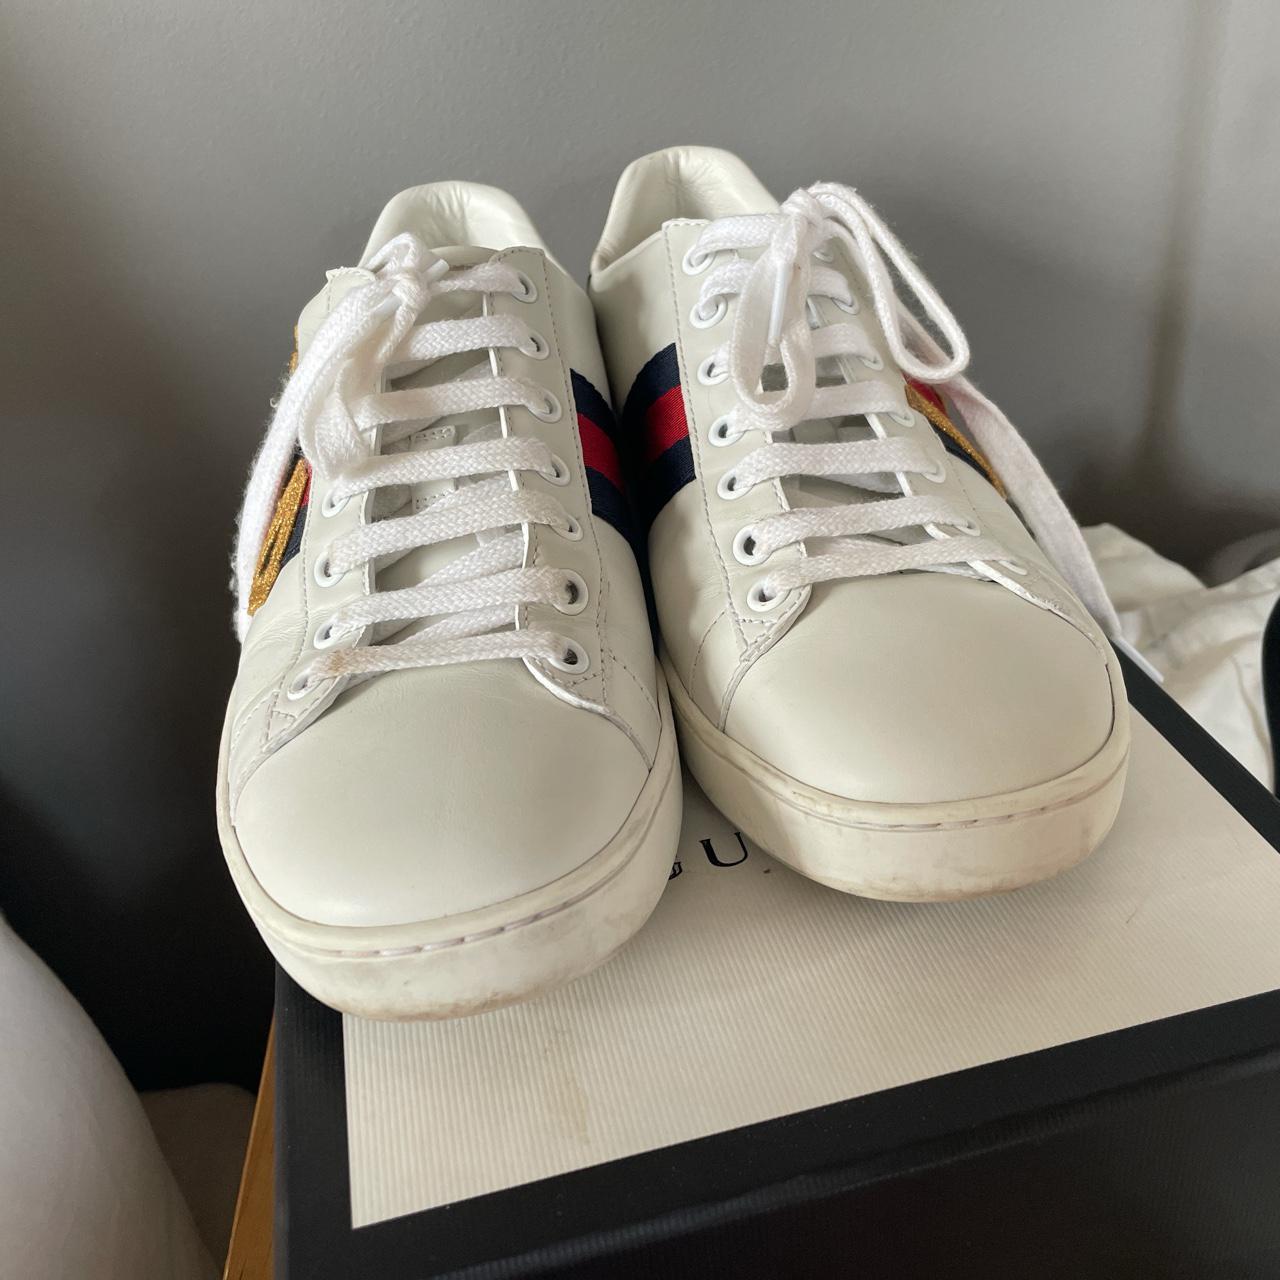 Product Image 4 - Authentic Gucci trainers. Work a